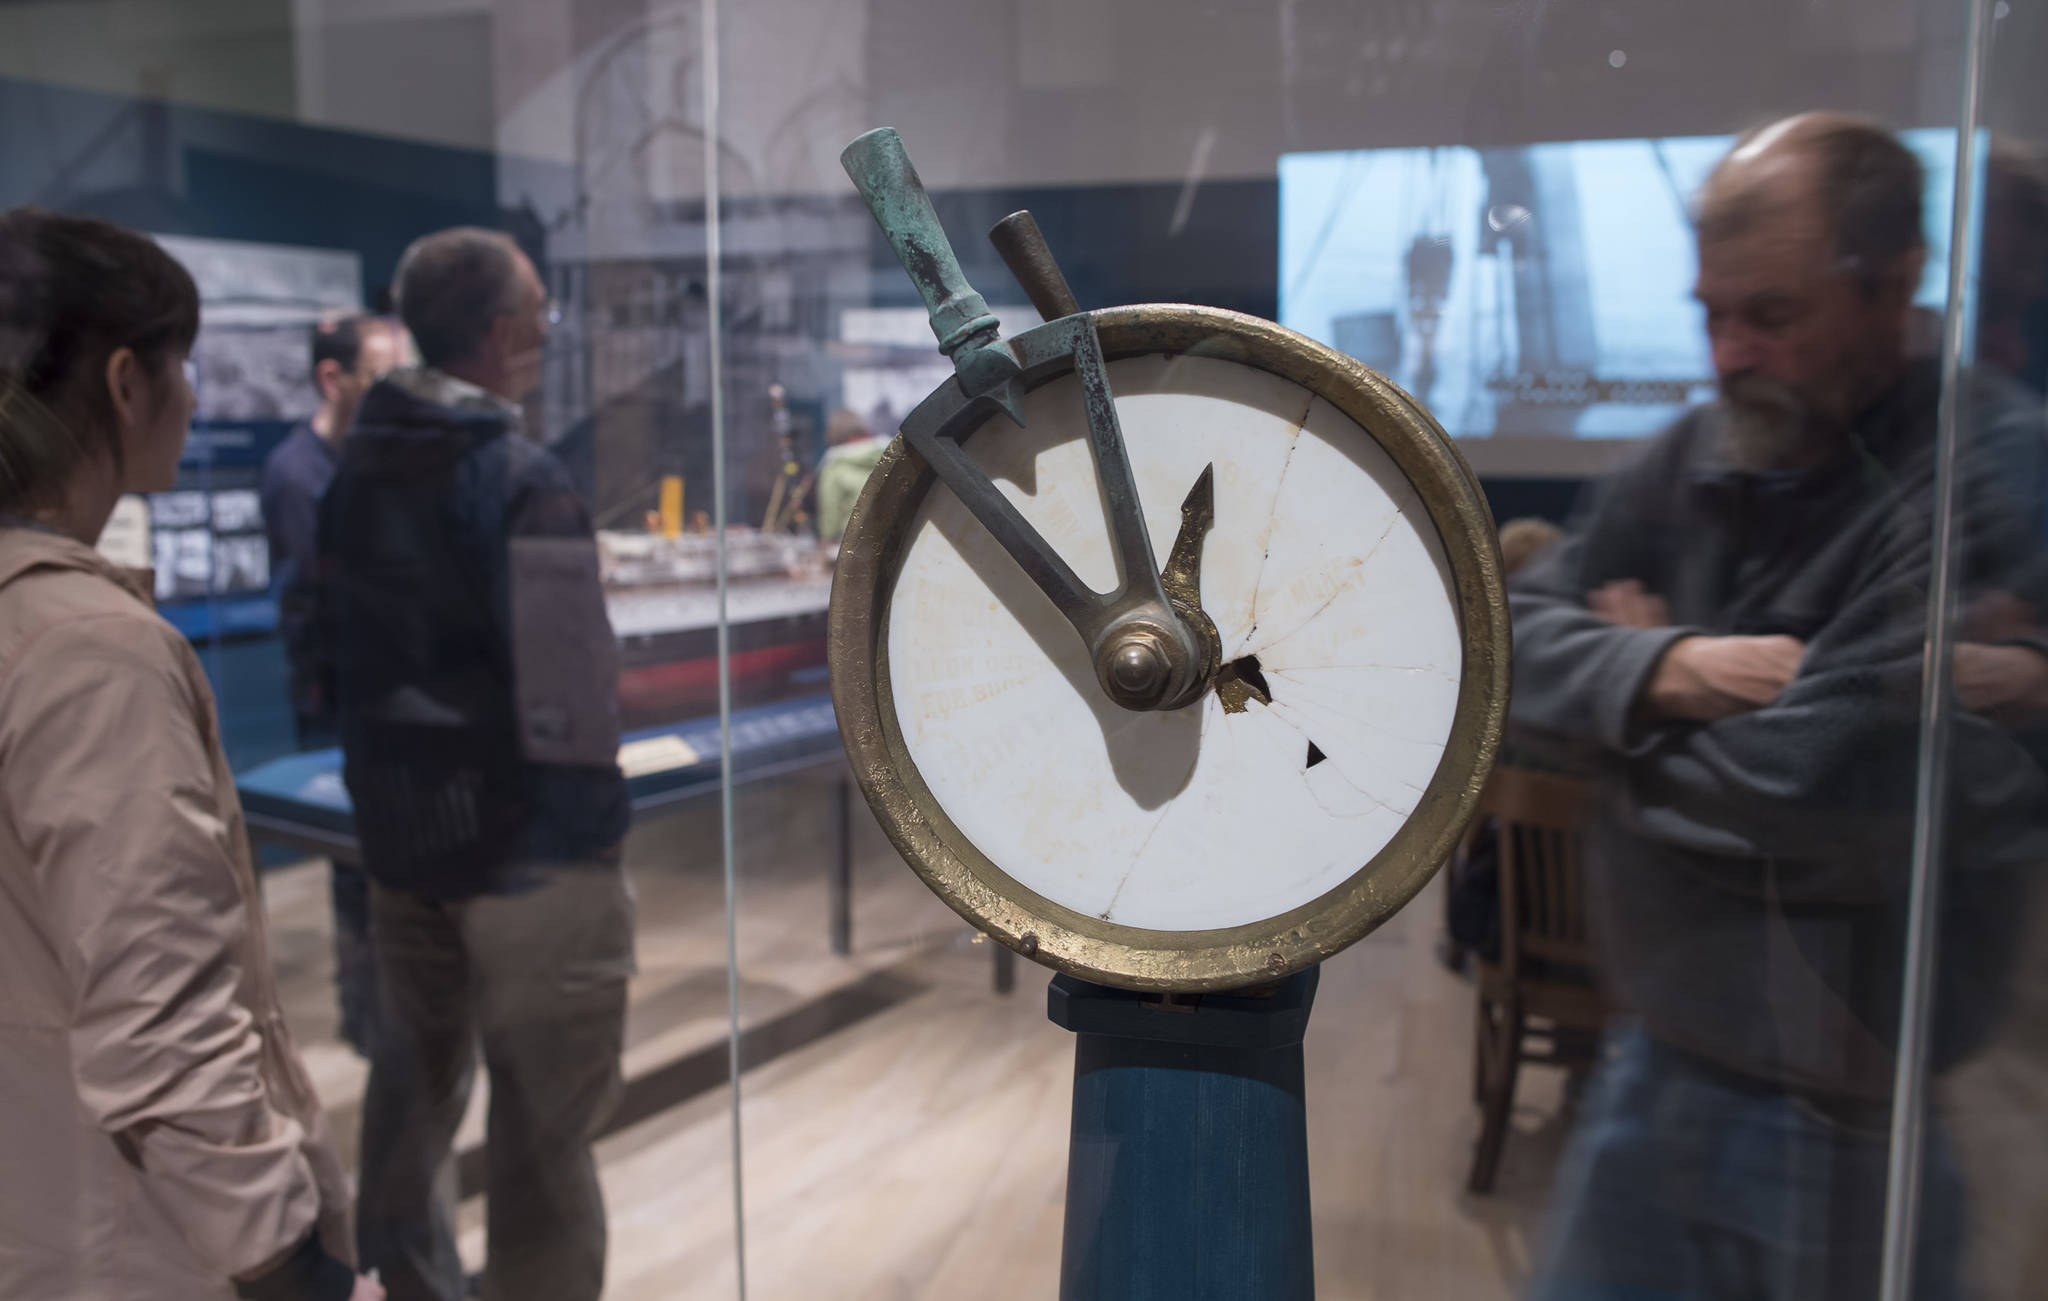 A docking telegraph is one of the many items recovered and on view at the Alaska State Museum’s “Titanic of the North: The 1918 Wreck of the S.S. Princess Sophia” exhibit during First Friday on Friday, Sept. 7, 2018. (Michael Penn | Juneau Empire)